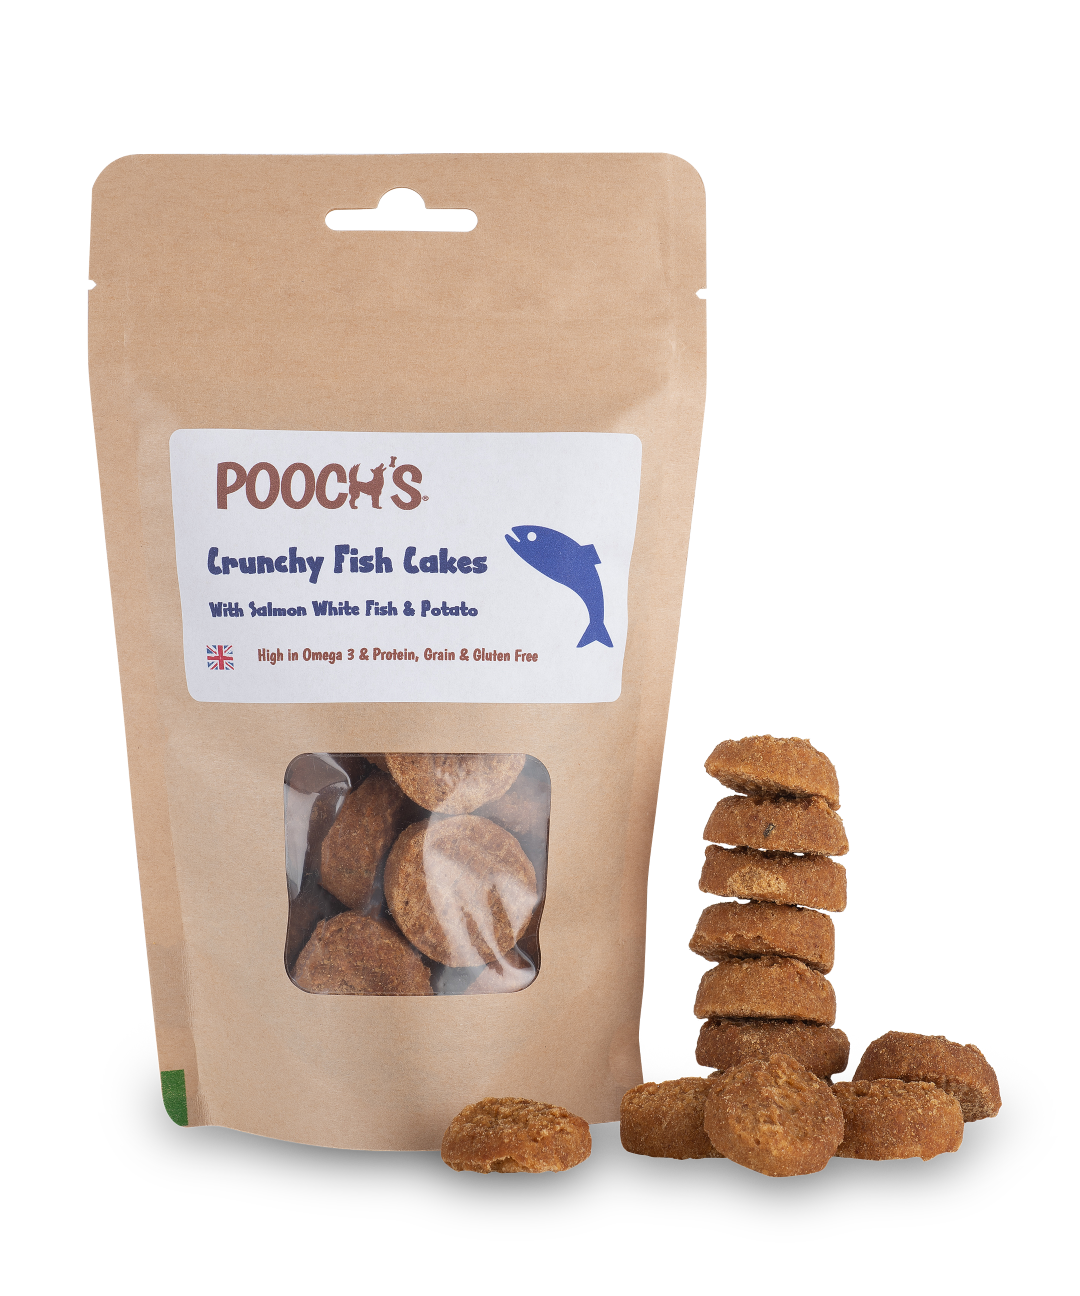 Pooch's Crunchy Fish Cakes